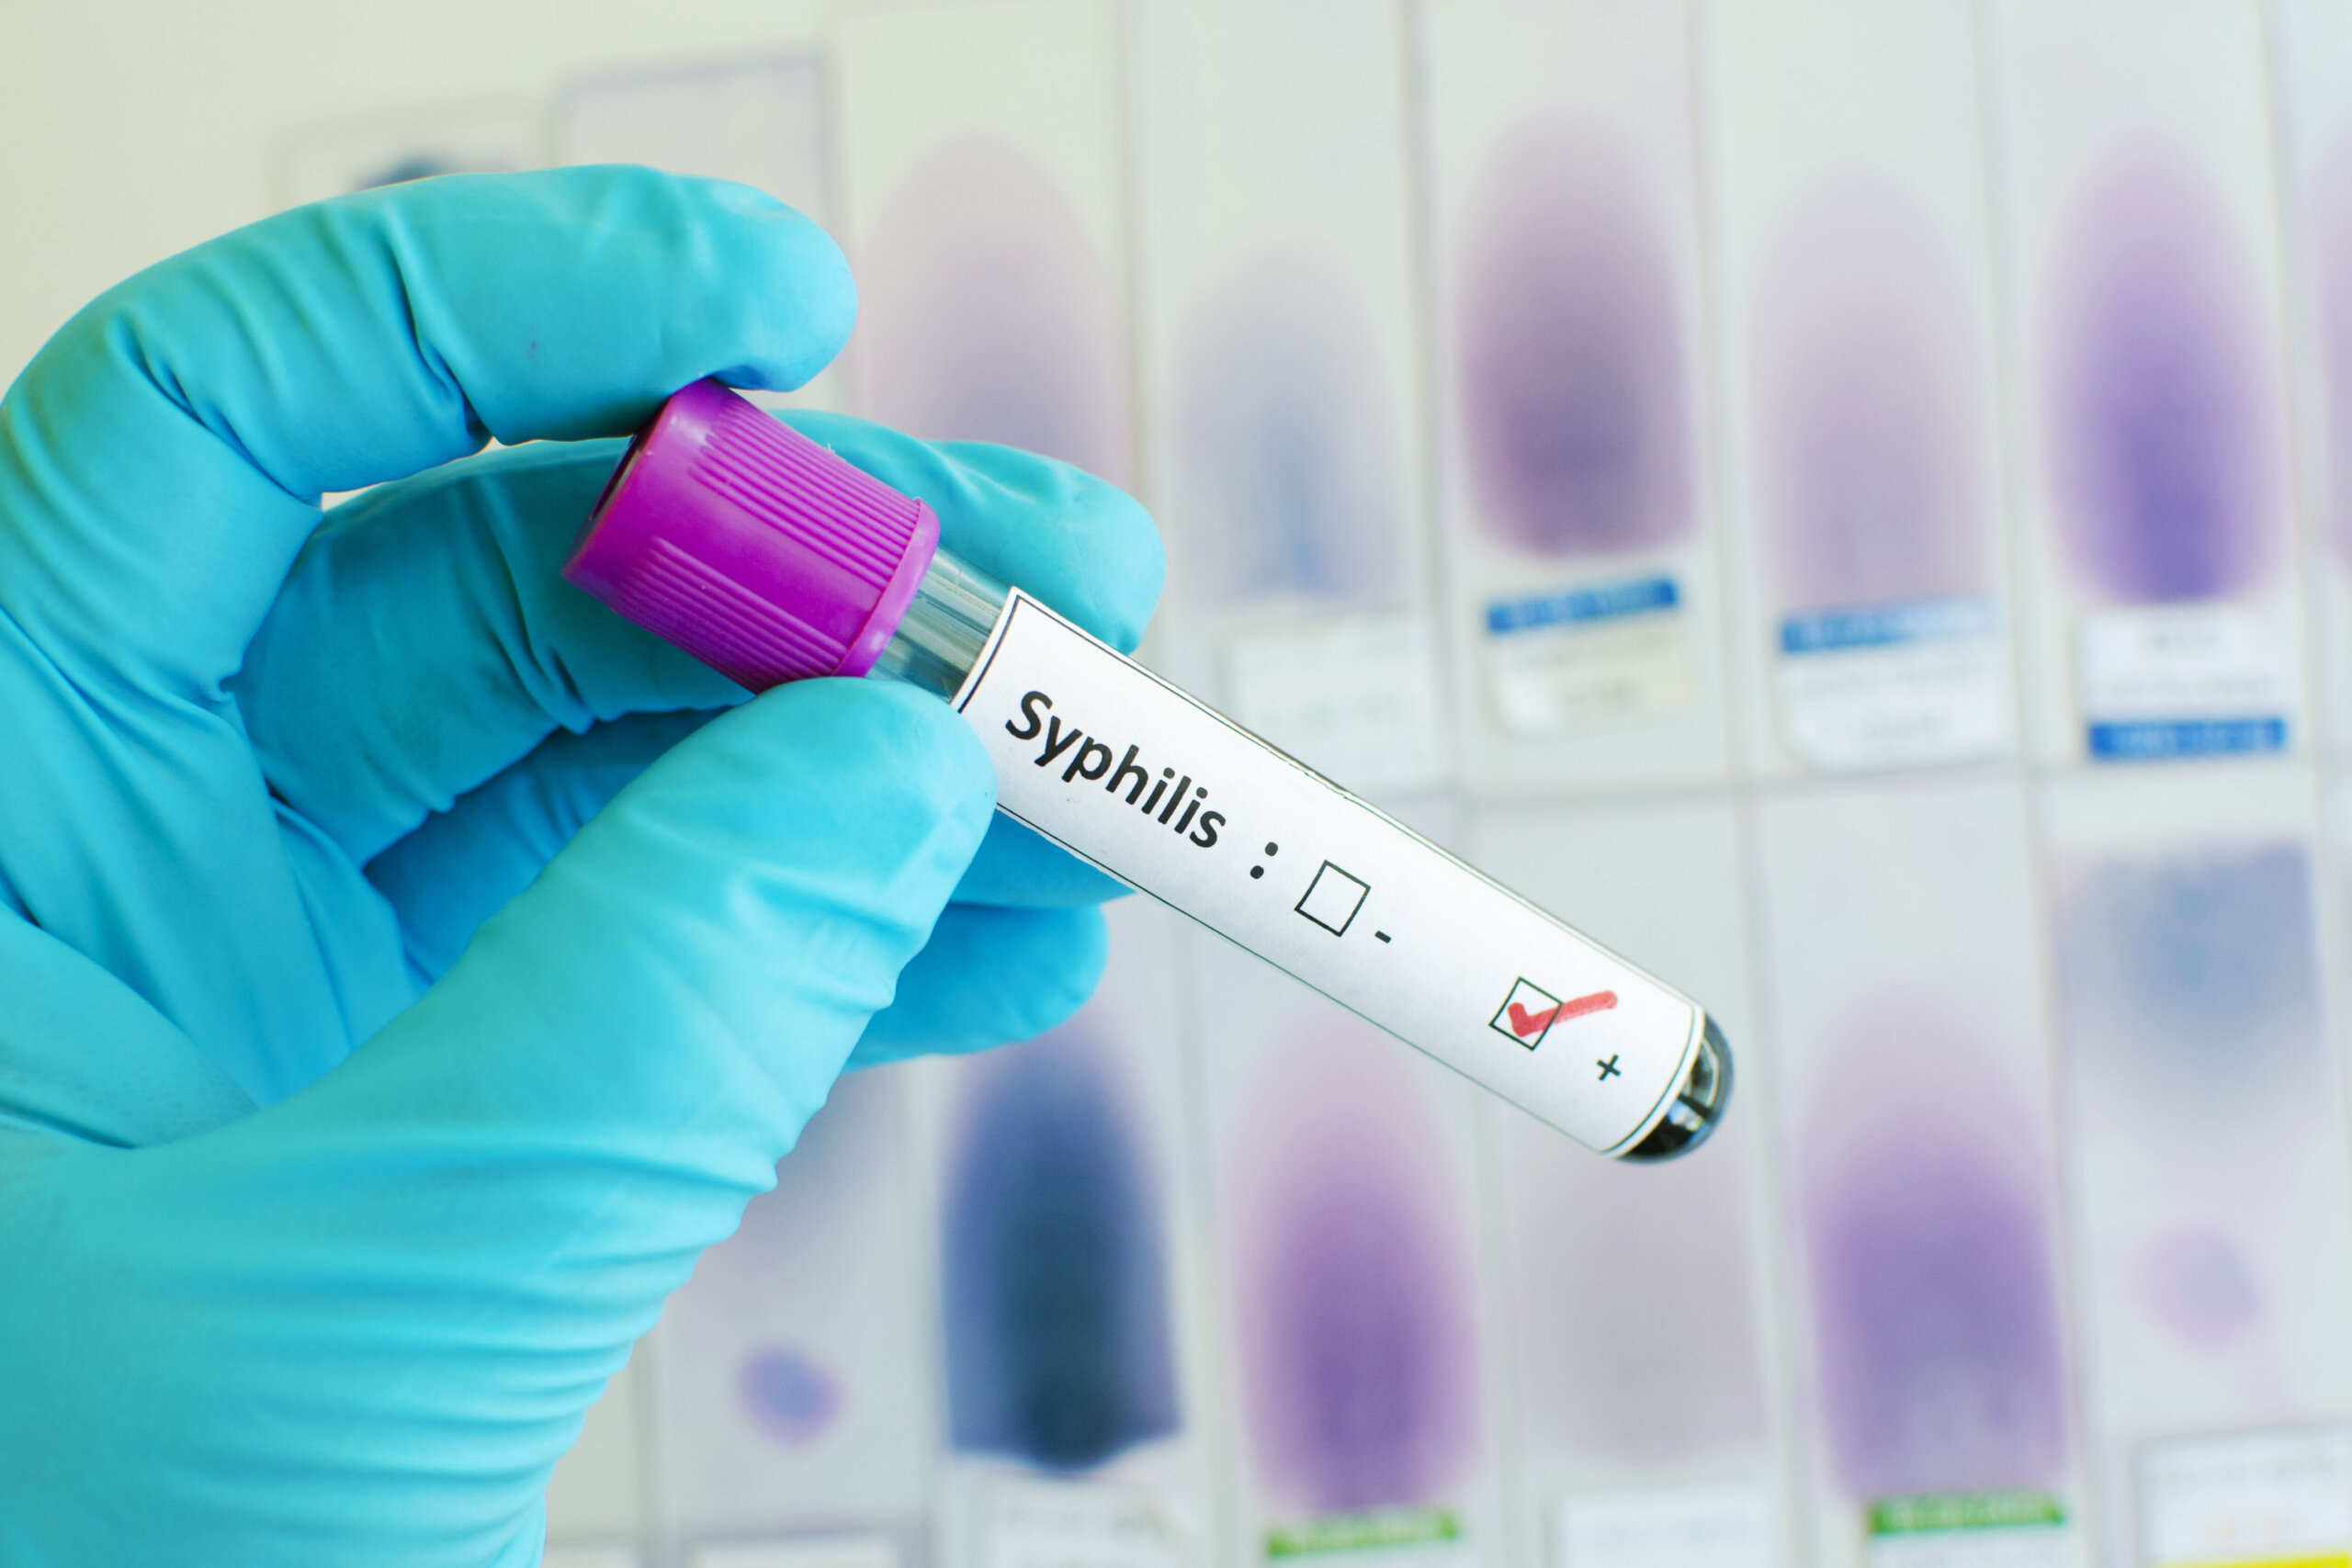 Virginia health officials are concerned about a “significant rise” in syphilis cases